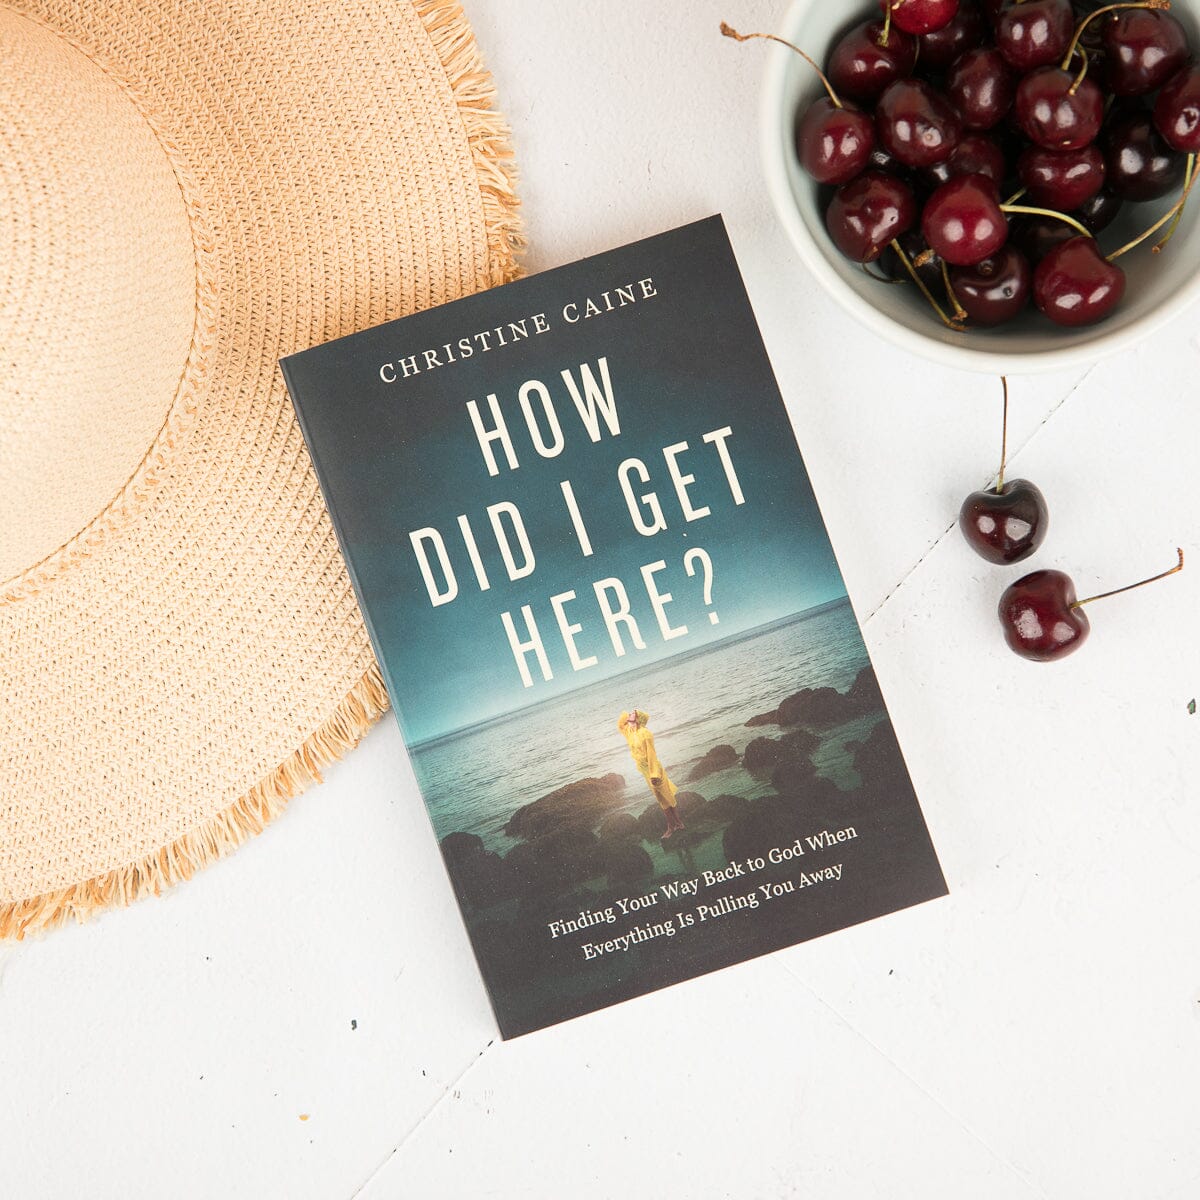 How Did I Get Here? by Christine Caine